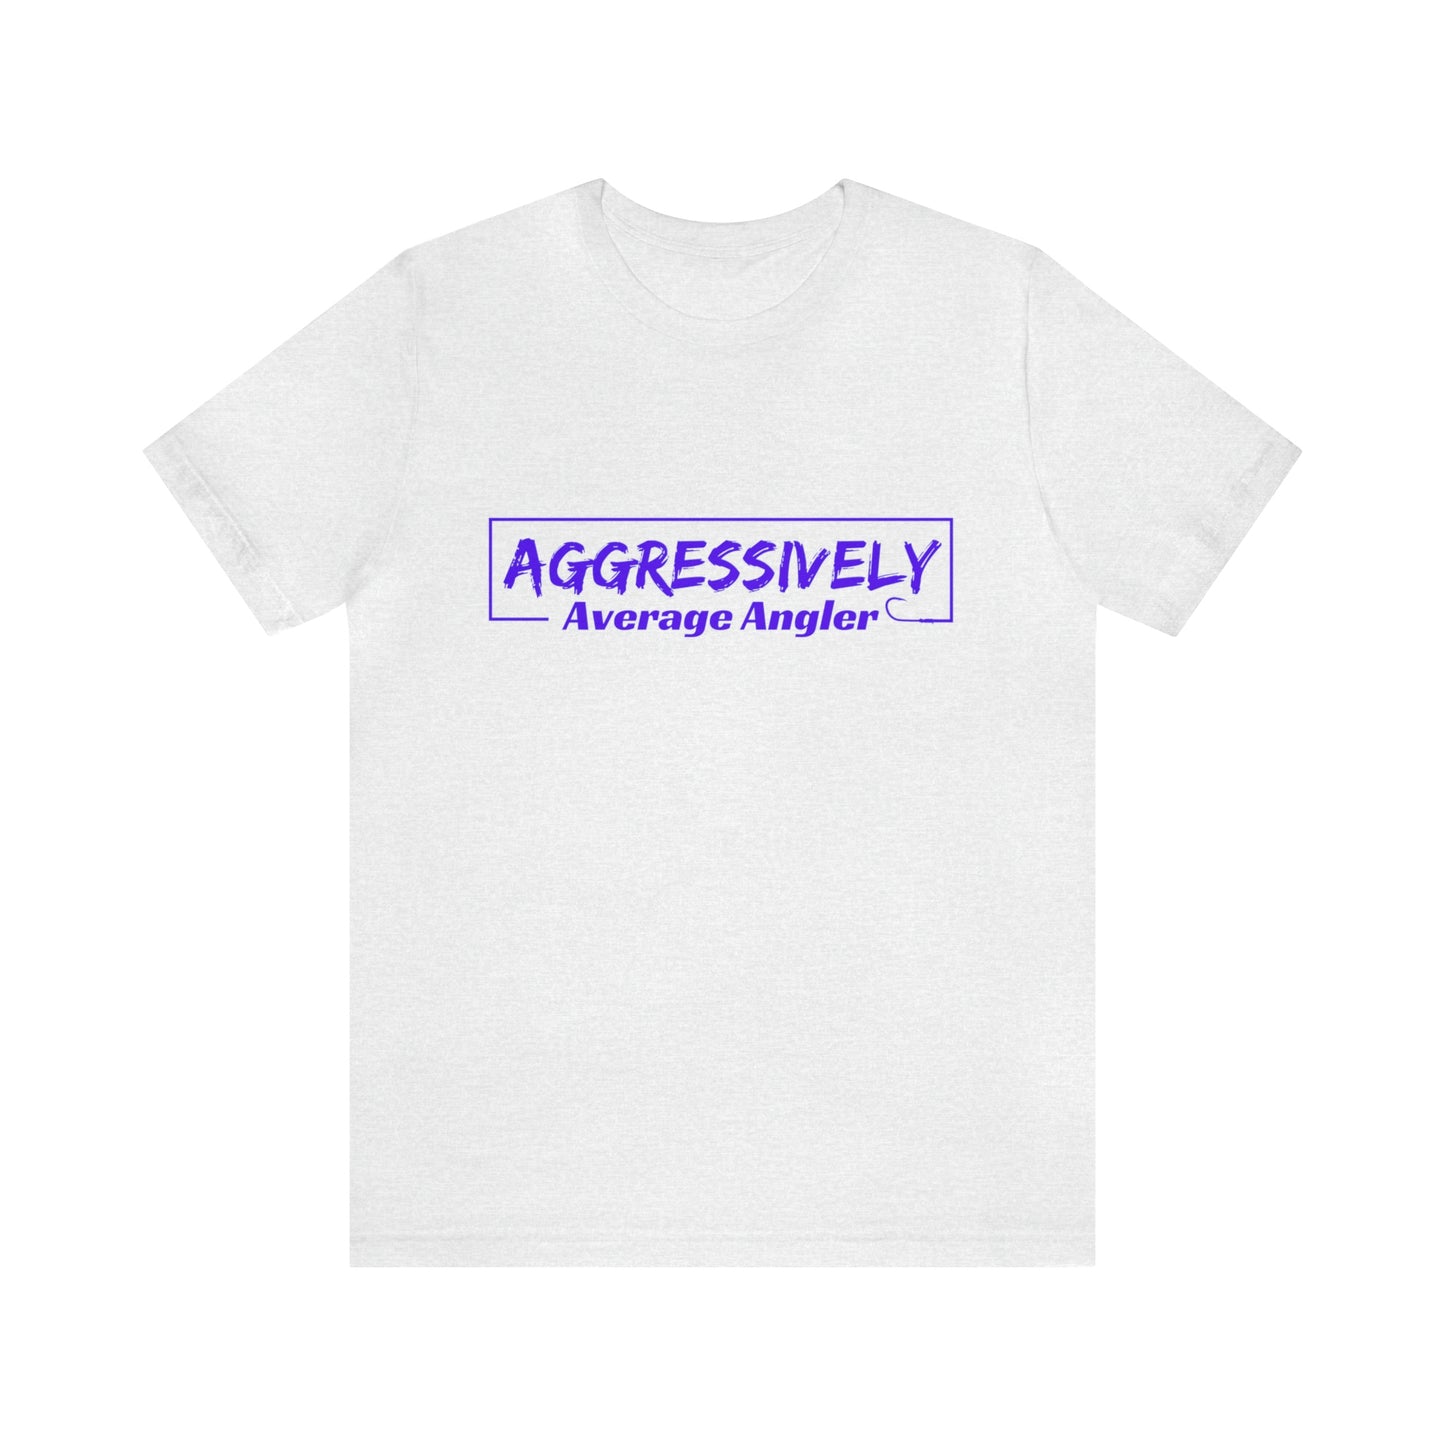 Aggressively Average Angler Tee (Light colors)